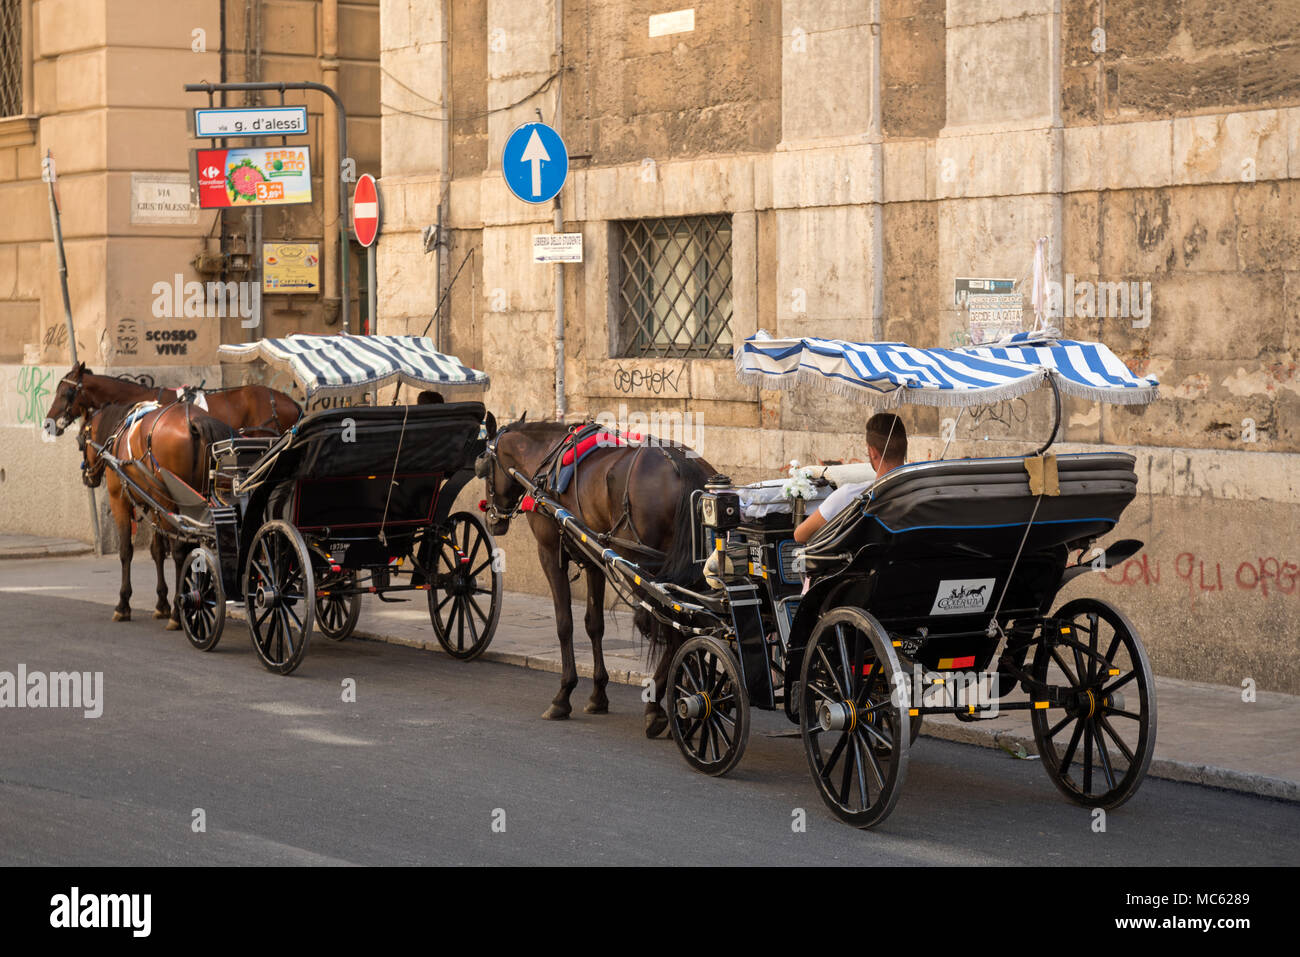 Horse drawn carriage taxis in Palermo, Sicily, Italy, parked up in Via Maqueda by Fontana Pretoria and near the hub of the city Quattro Canti. Stock Photo